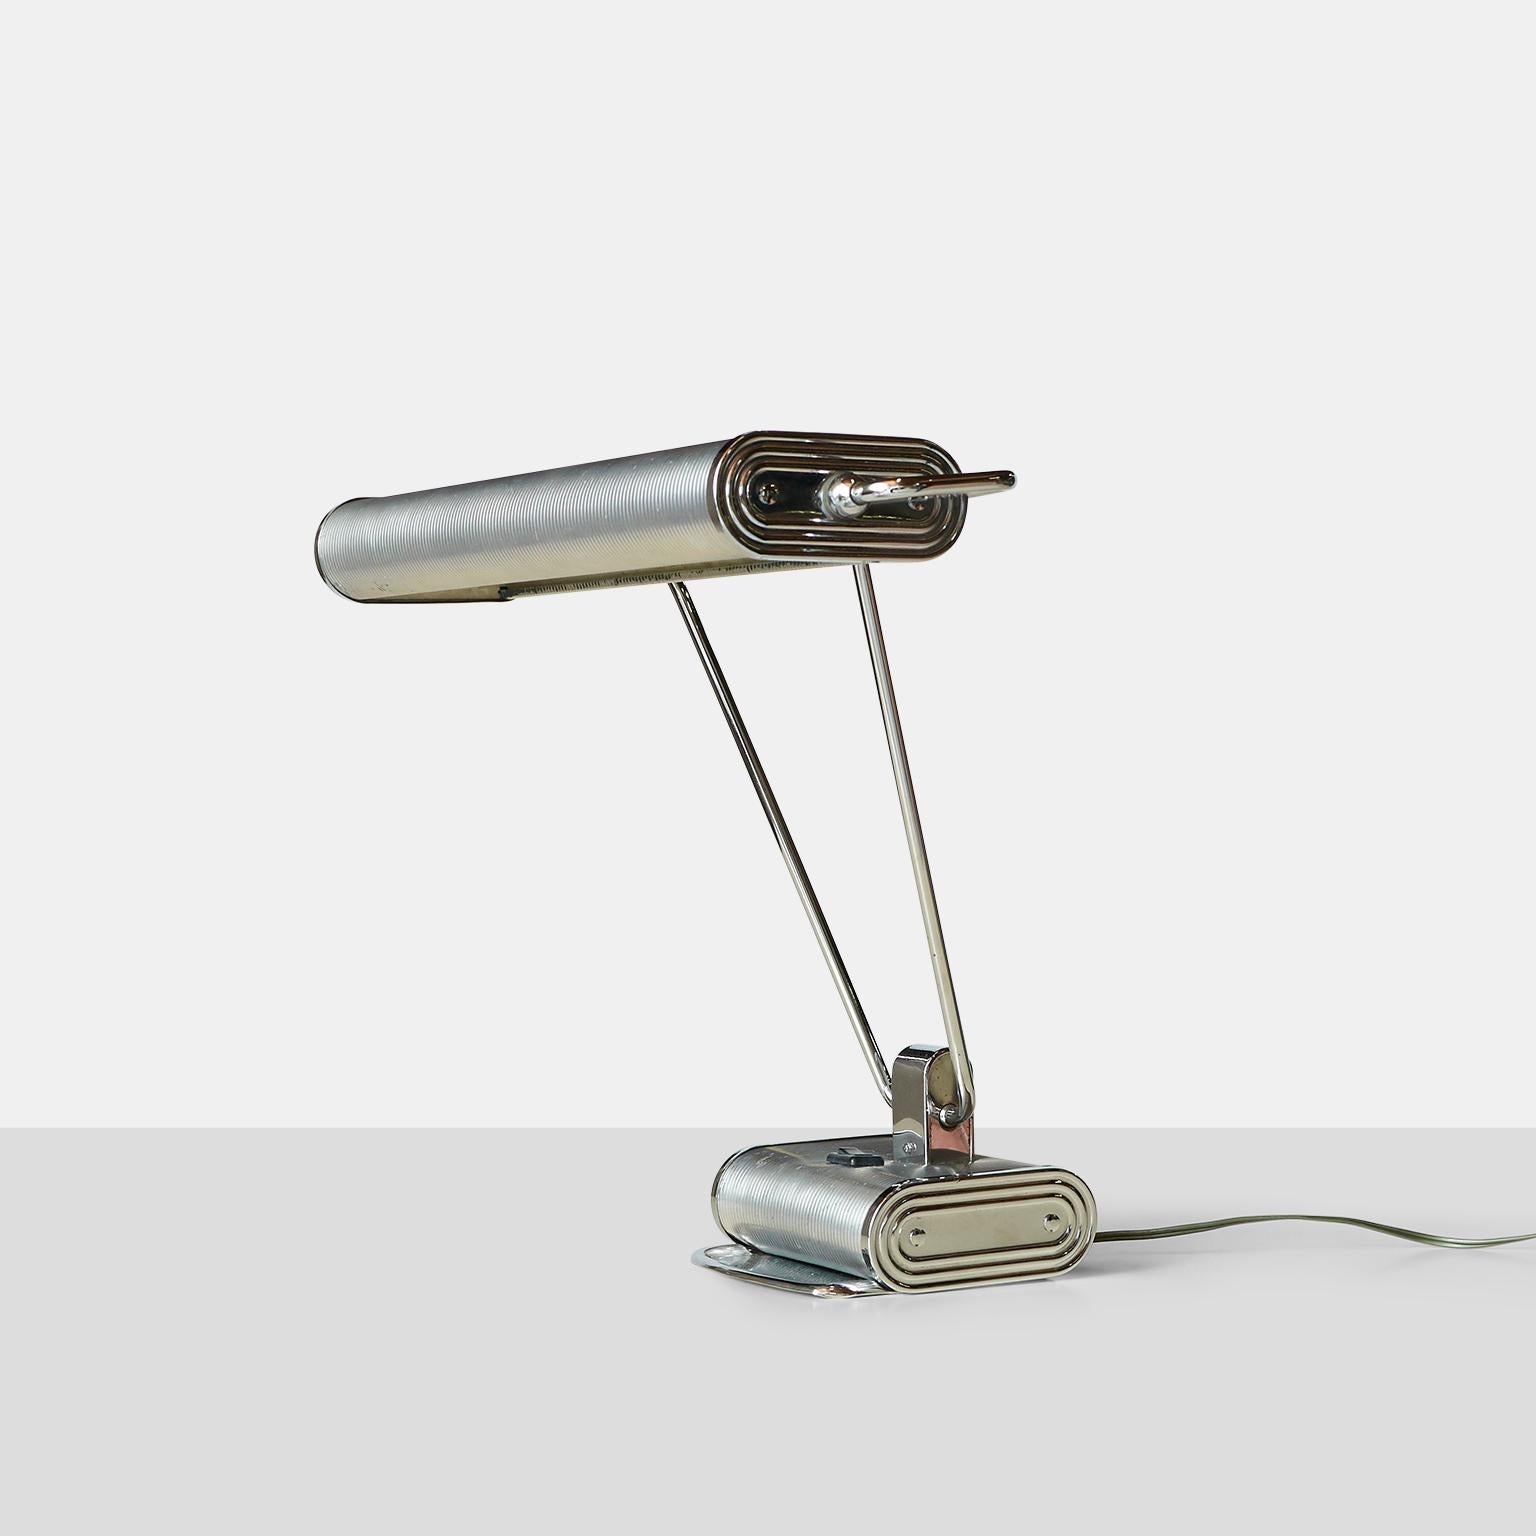 An desk lamp for the French manufacturer Jumo from the early 1940s. Attributed often to Eileen Gray  Adjustable arm and shade in silver lacquered metal and chrome. Two-light bayonet bulbs with the switch located on base.